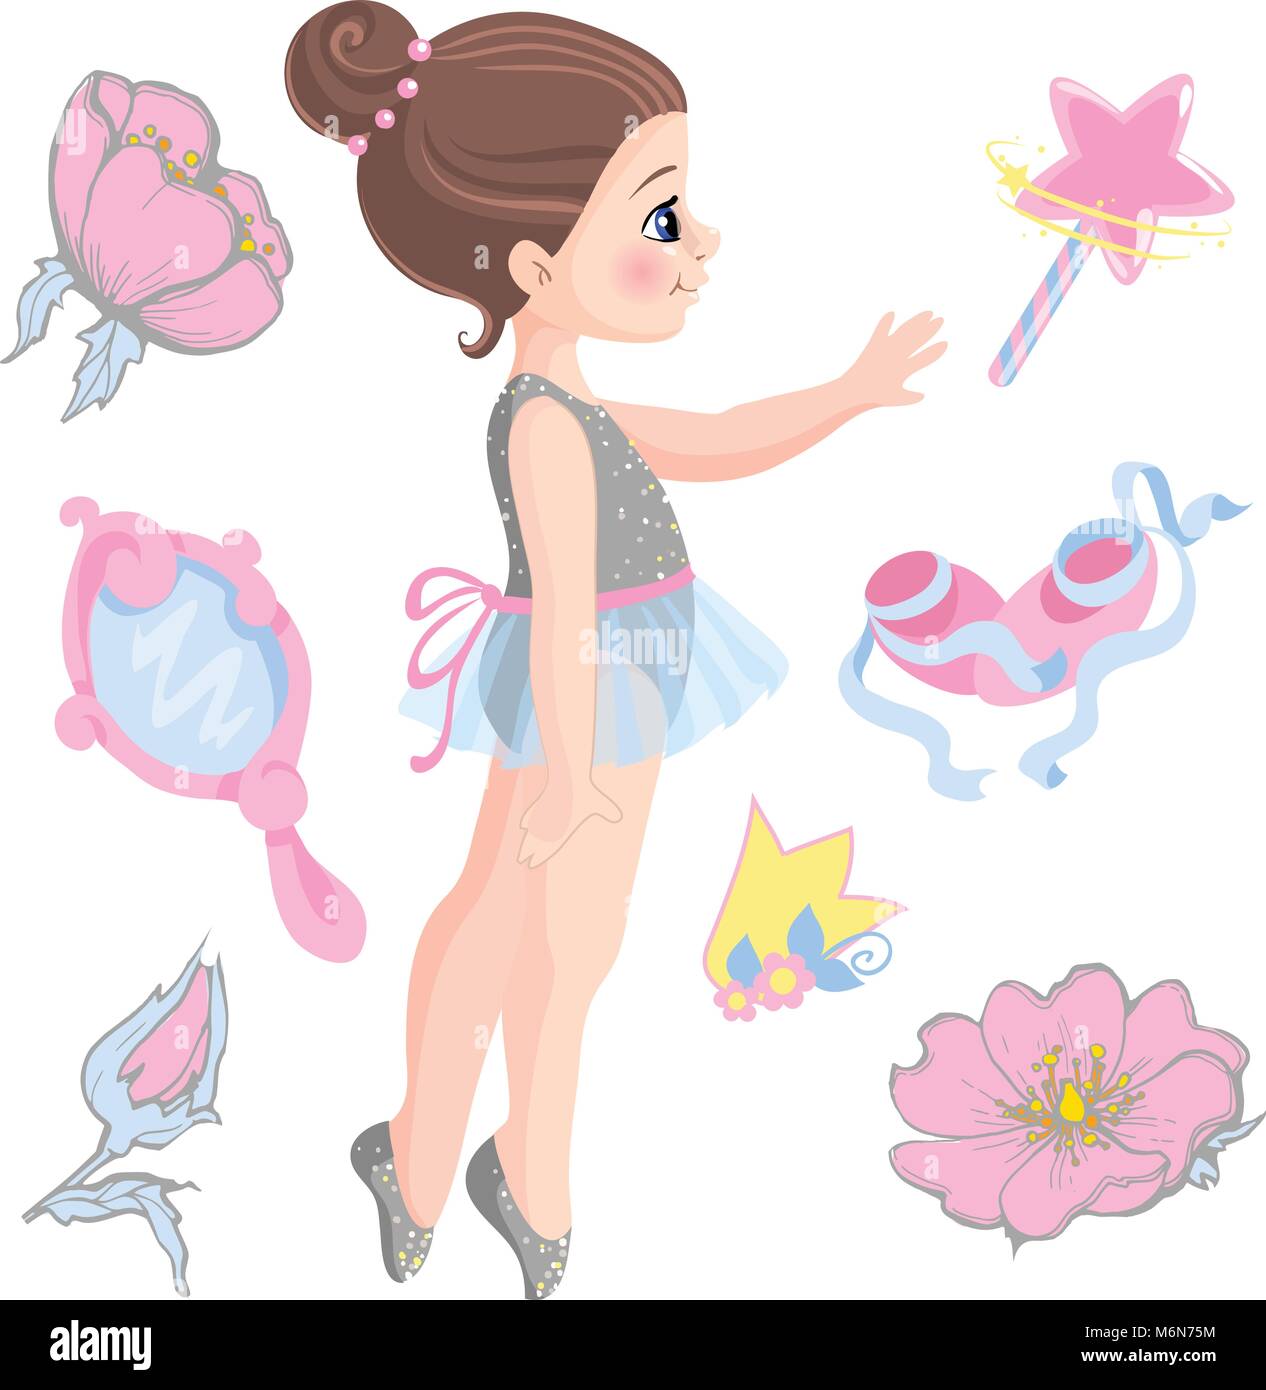 Vector illustration of little ballerina and other related items magic wand, star, glitters, flower of rose, mirror, crown, tiara. Stock Vector